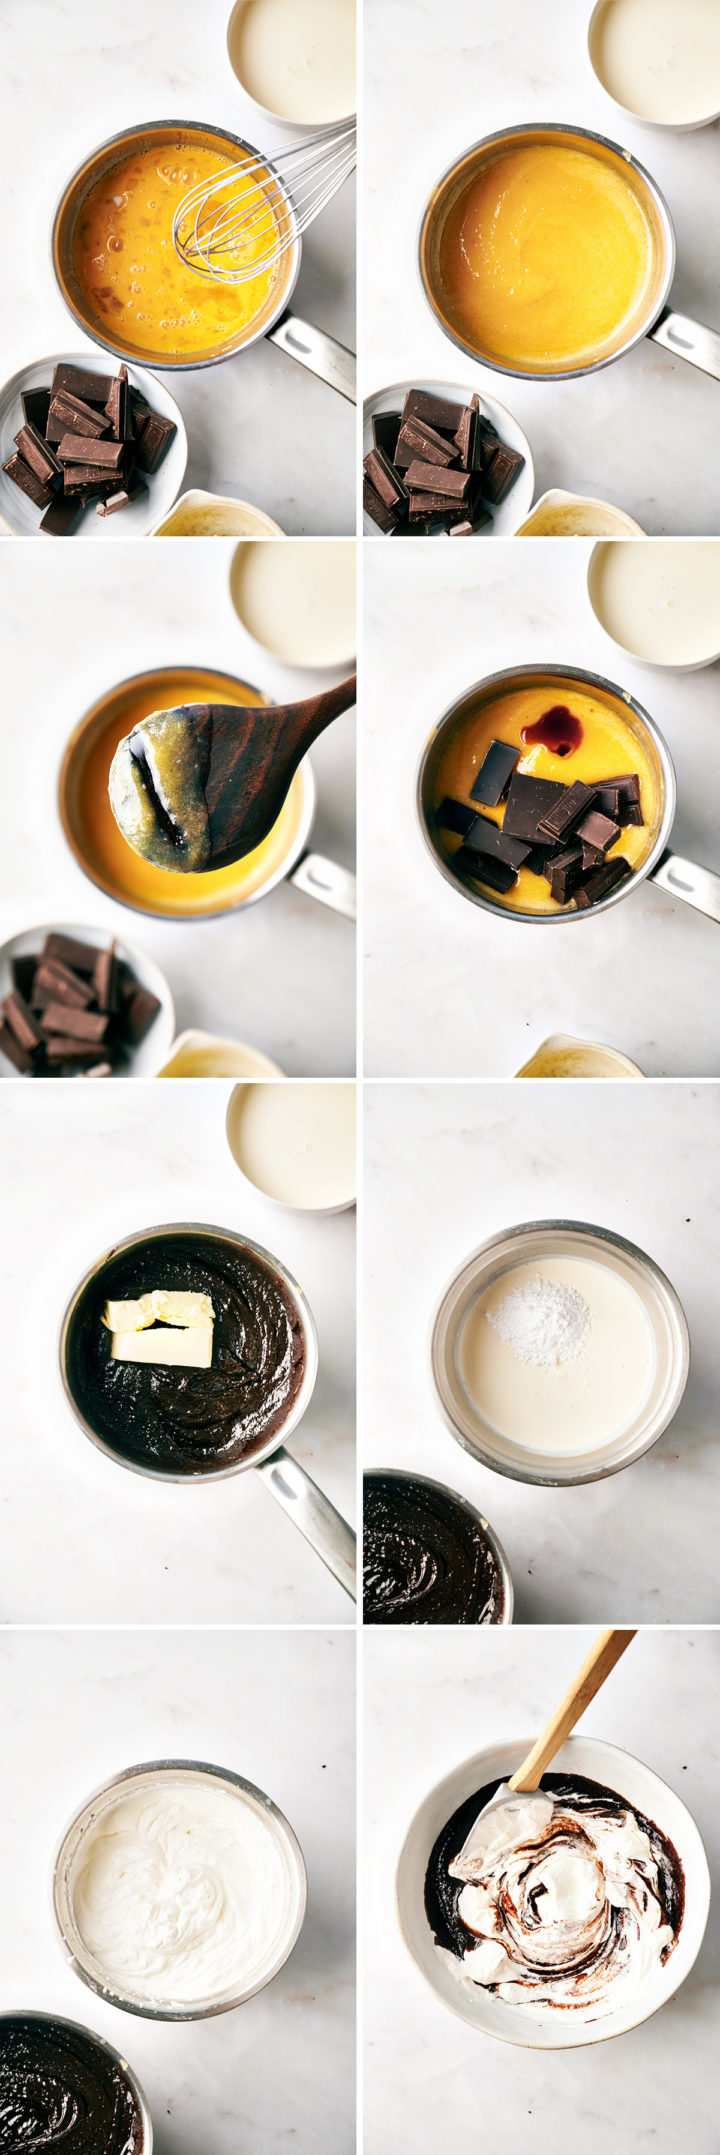 step by step photo collage how to make chocolate tart filling